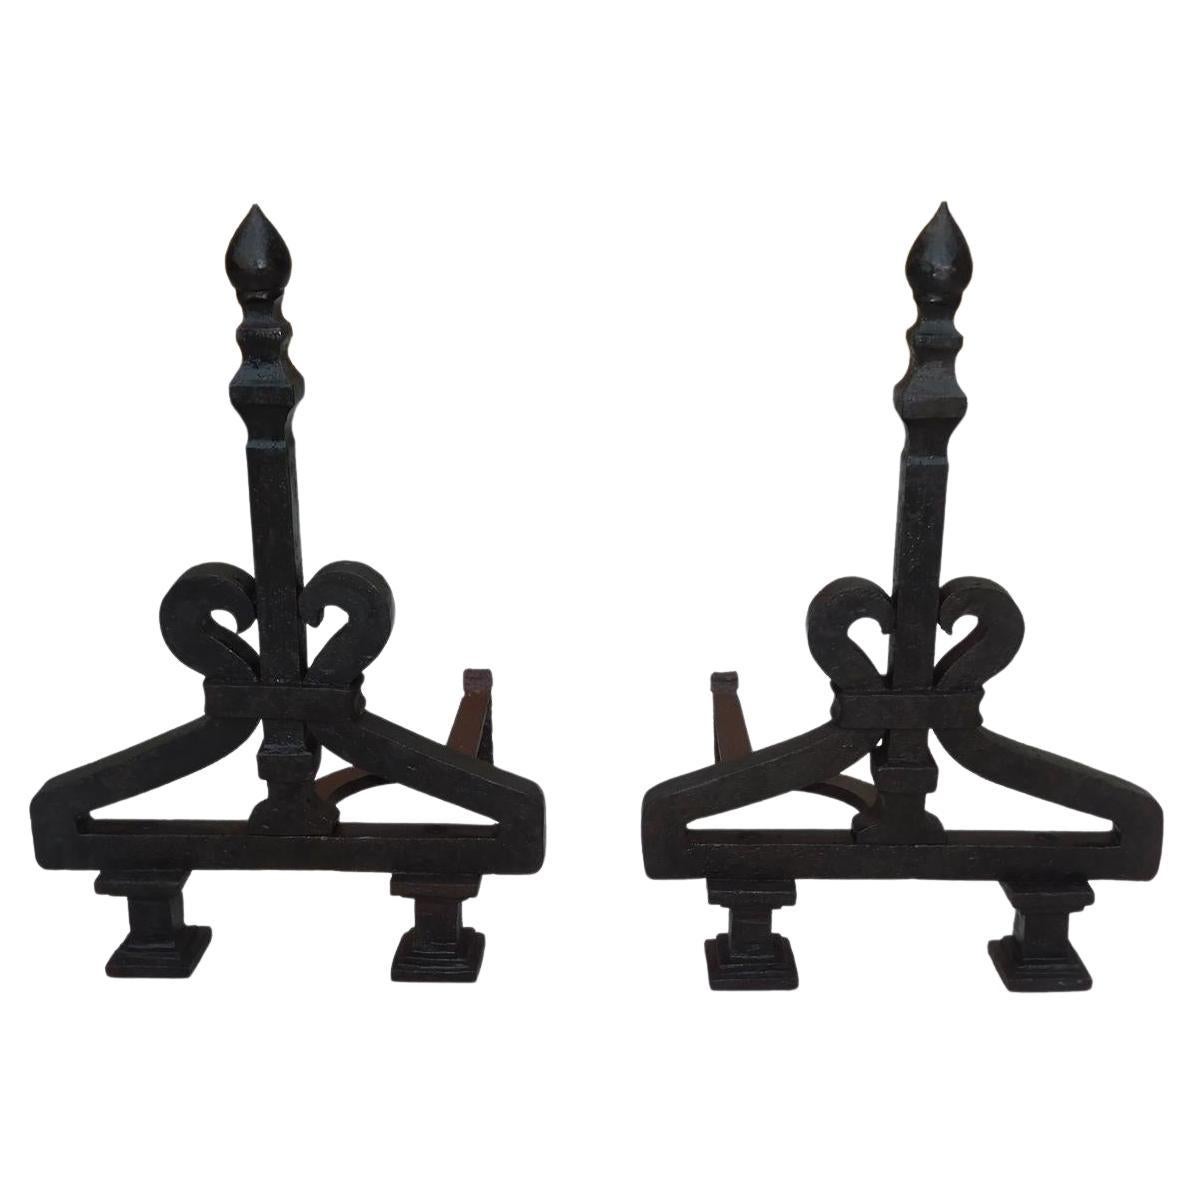 American Wrought Iron Faceted Lemon Finial Andirons w/ Scrolled Plinths, C. 1820